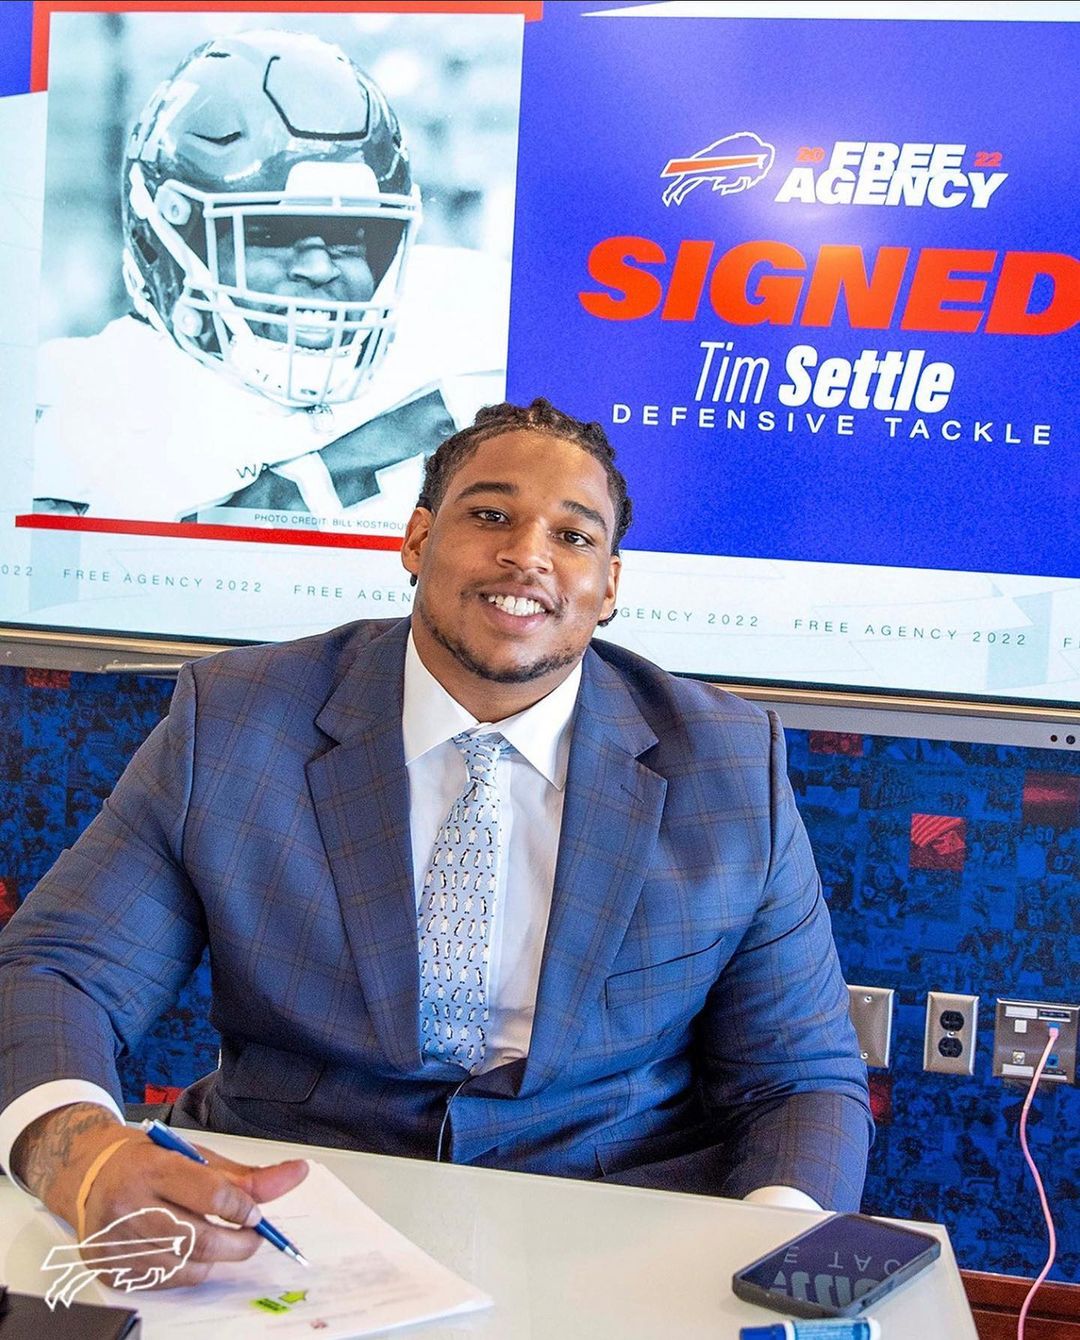 Tim Settle Jr. Signing contract with the Buffalo Bills